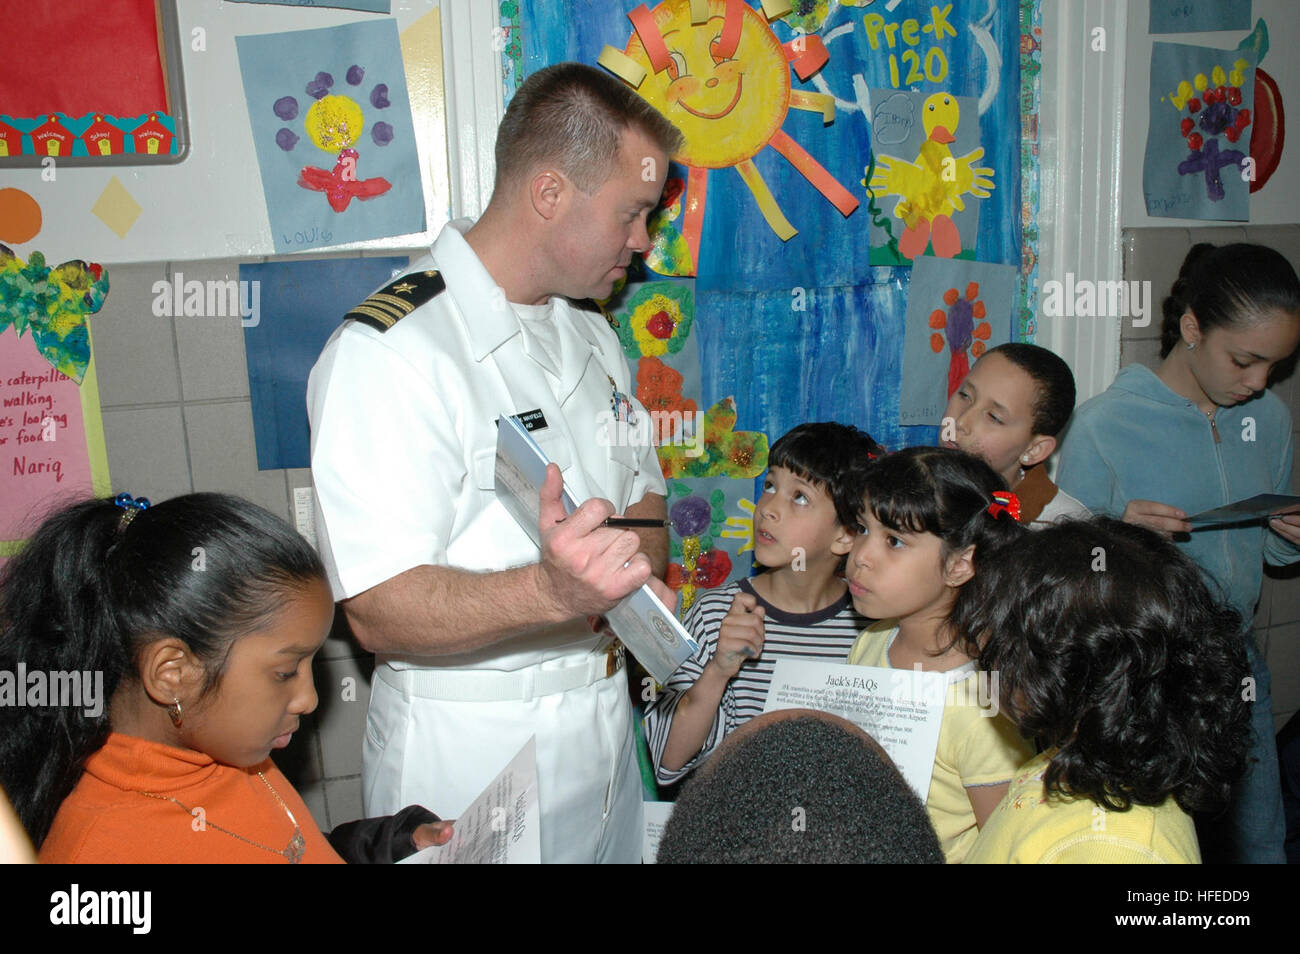 050526-N-1205W-001 New York City (May 26, 2005) Ð Lt. Cmdr. Chuck Mayfield speaks to children of the Jacob Blackwell After School Program in Queens, New York, during a community relations (COMREL) project as part of Fleet Week 2005. COMREL is a program for Sailor's and Marine's to get involved in the local community. Fleet Week allows the community to celebrate the sacrifices made by the U.S. Navy, Marine Corps, and Coast Guard by giving them the opportunity to visit the city and experience the ÒBig Apple'sÓ hospitality. U.S. Navy photo by PhotographerÕs Mate 2nd Class Regina Wiss (RELEASED) U Stock Photo